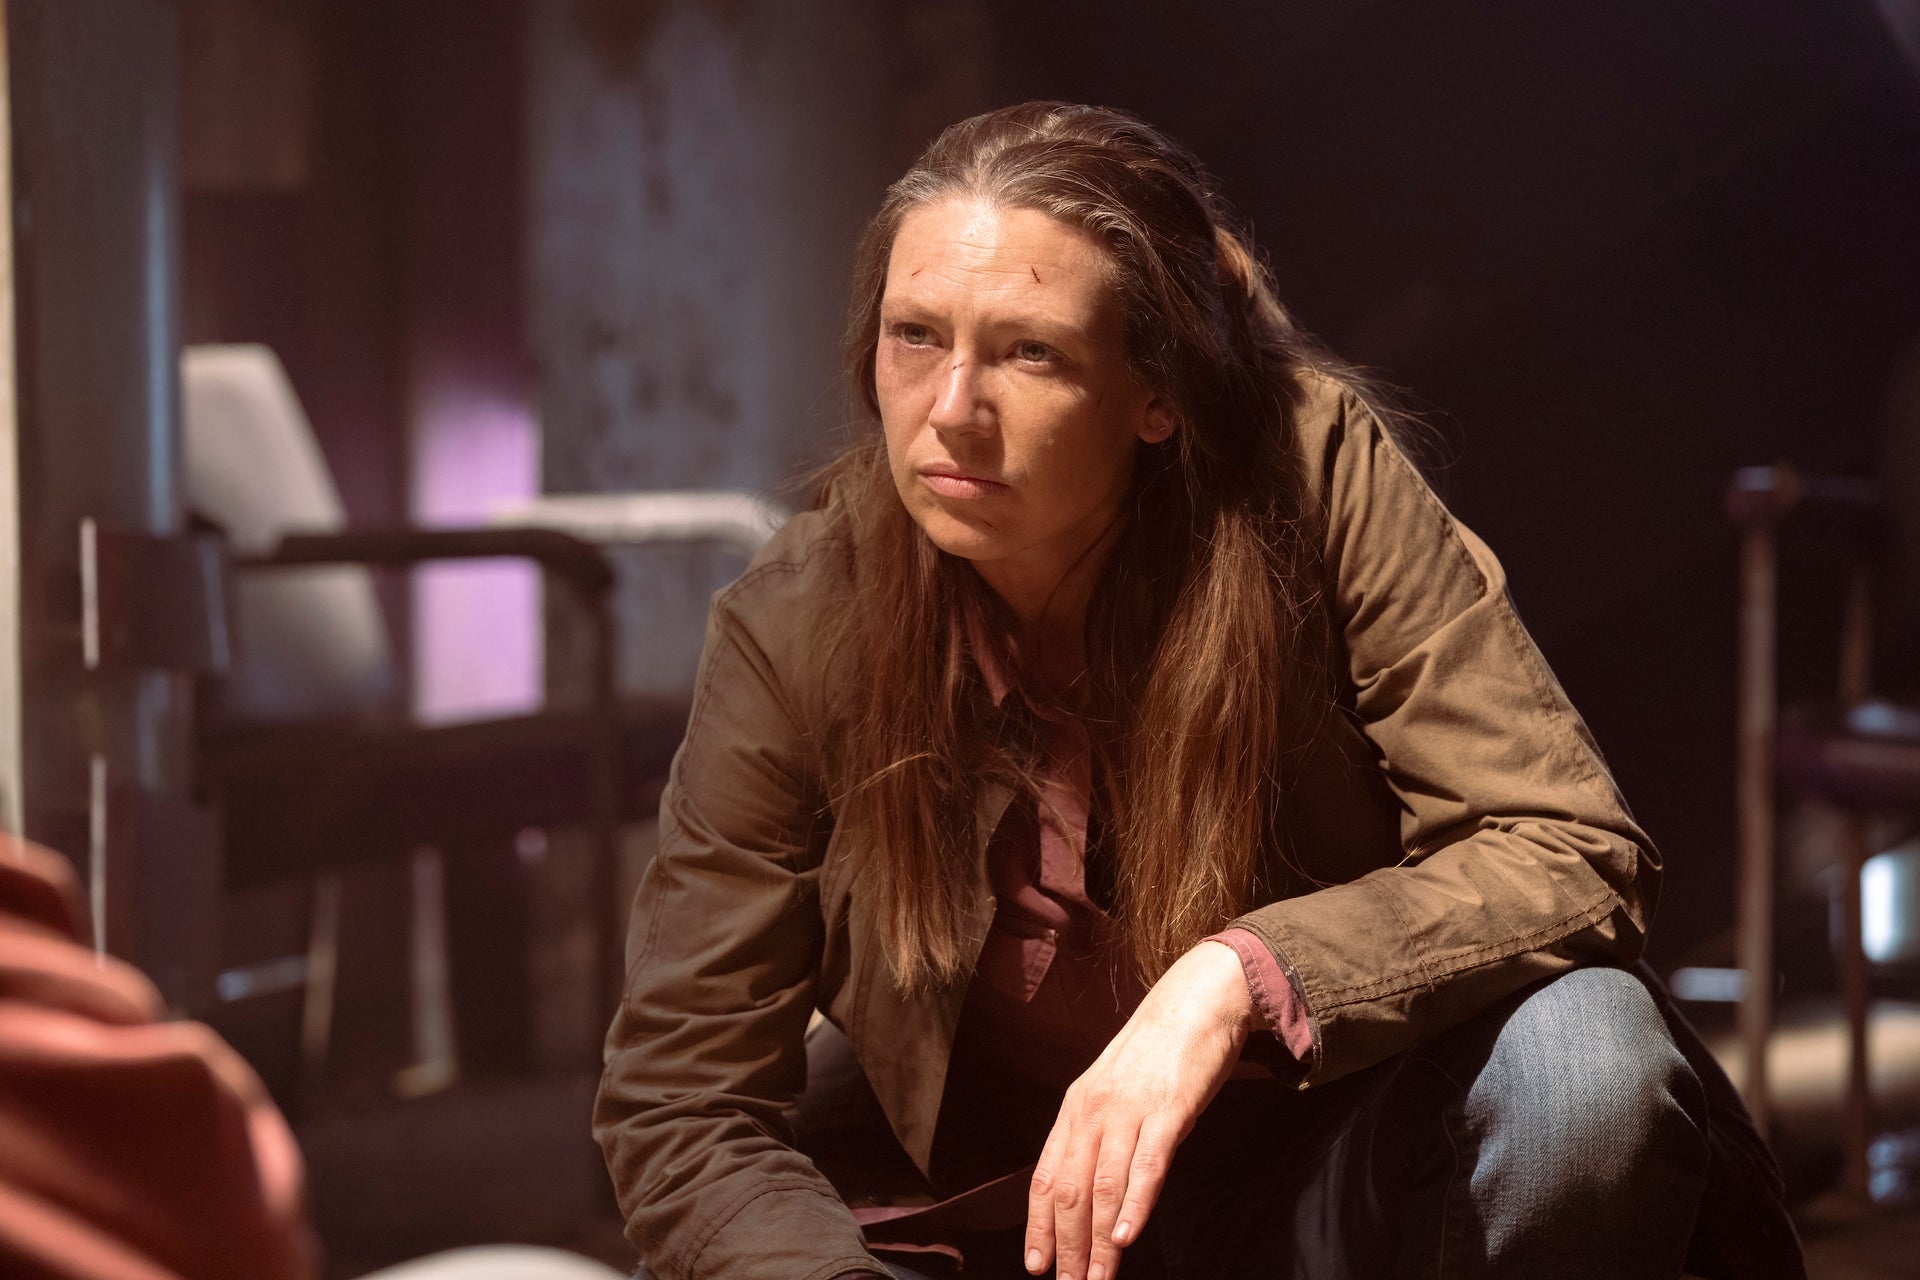 Anna Torv in ‘The Last of Us’